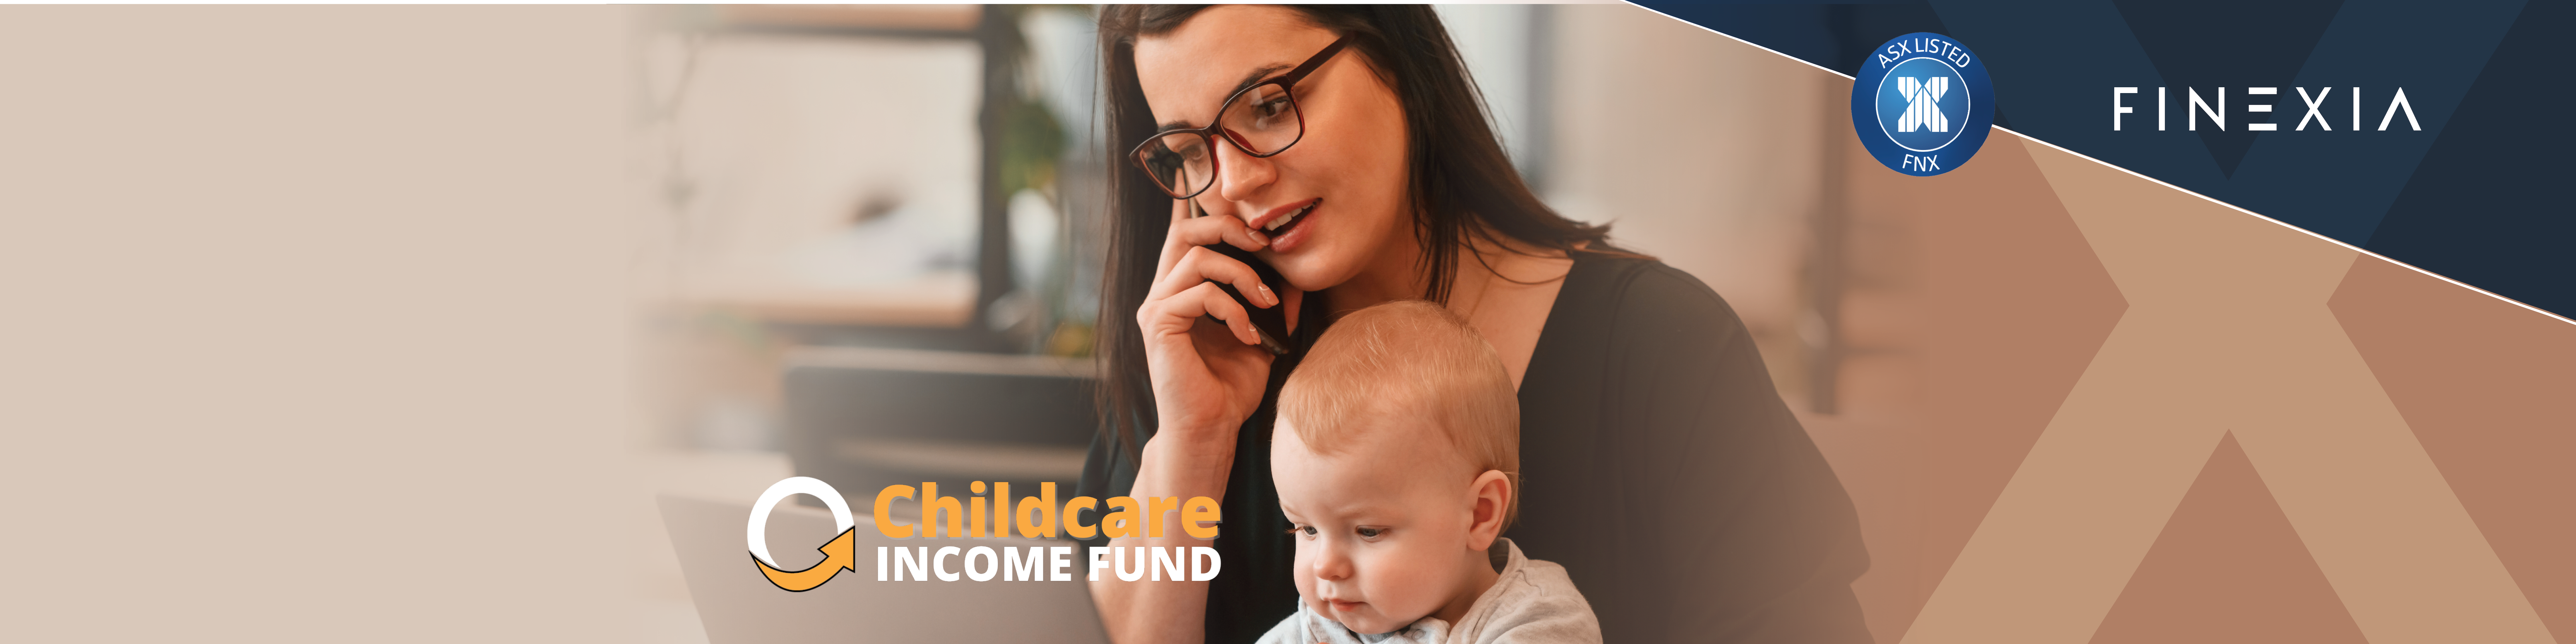 Investing in Women: Childcare Subsidies Pay Off for Australia's Economy